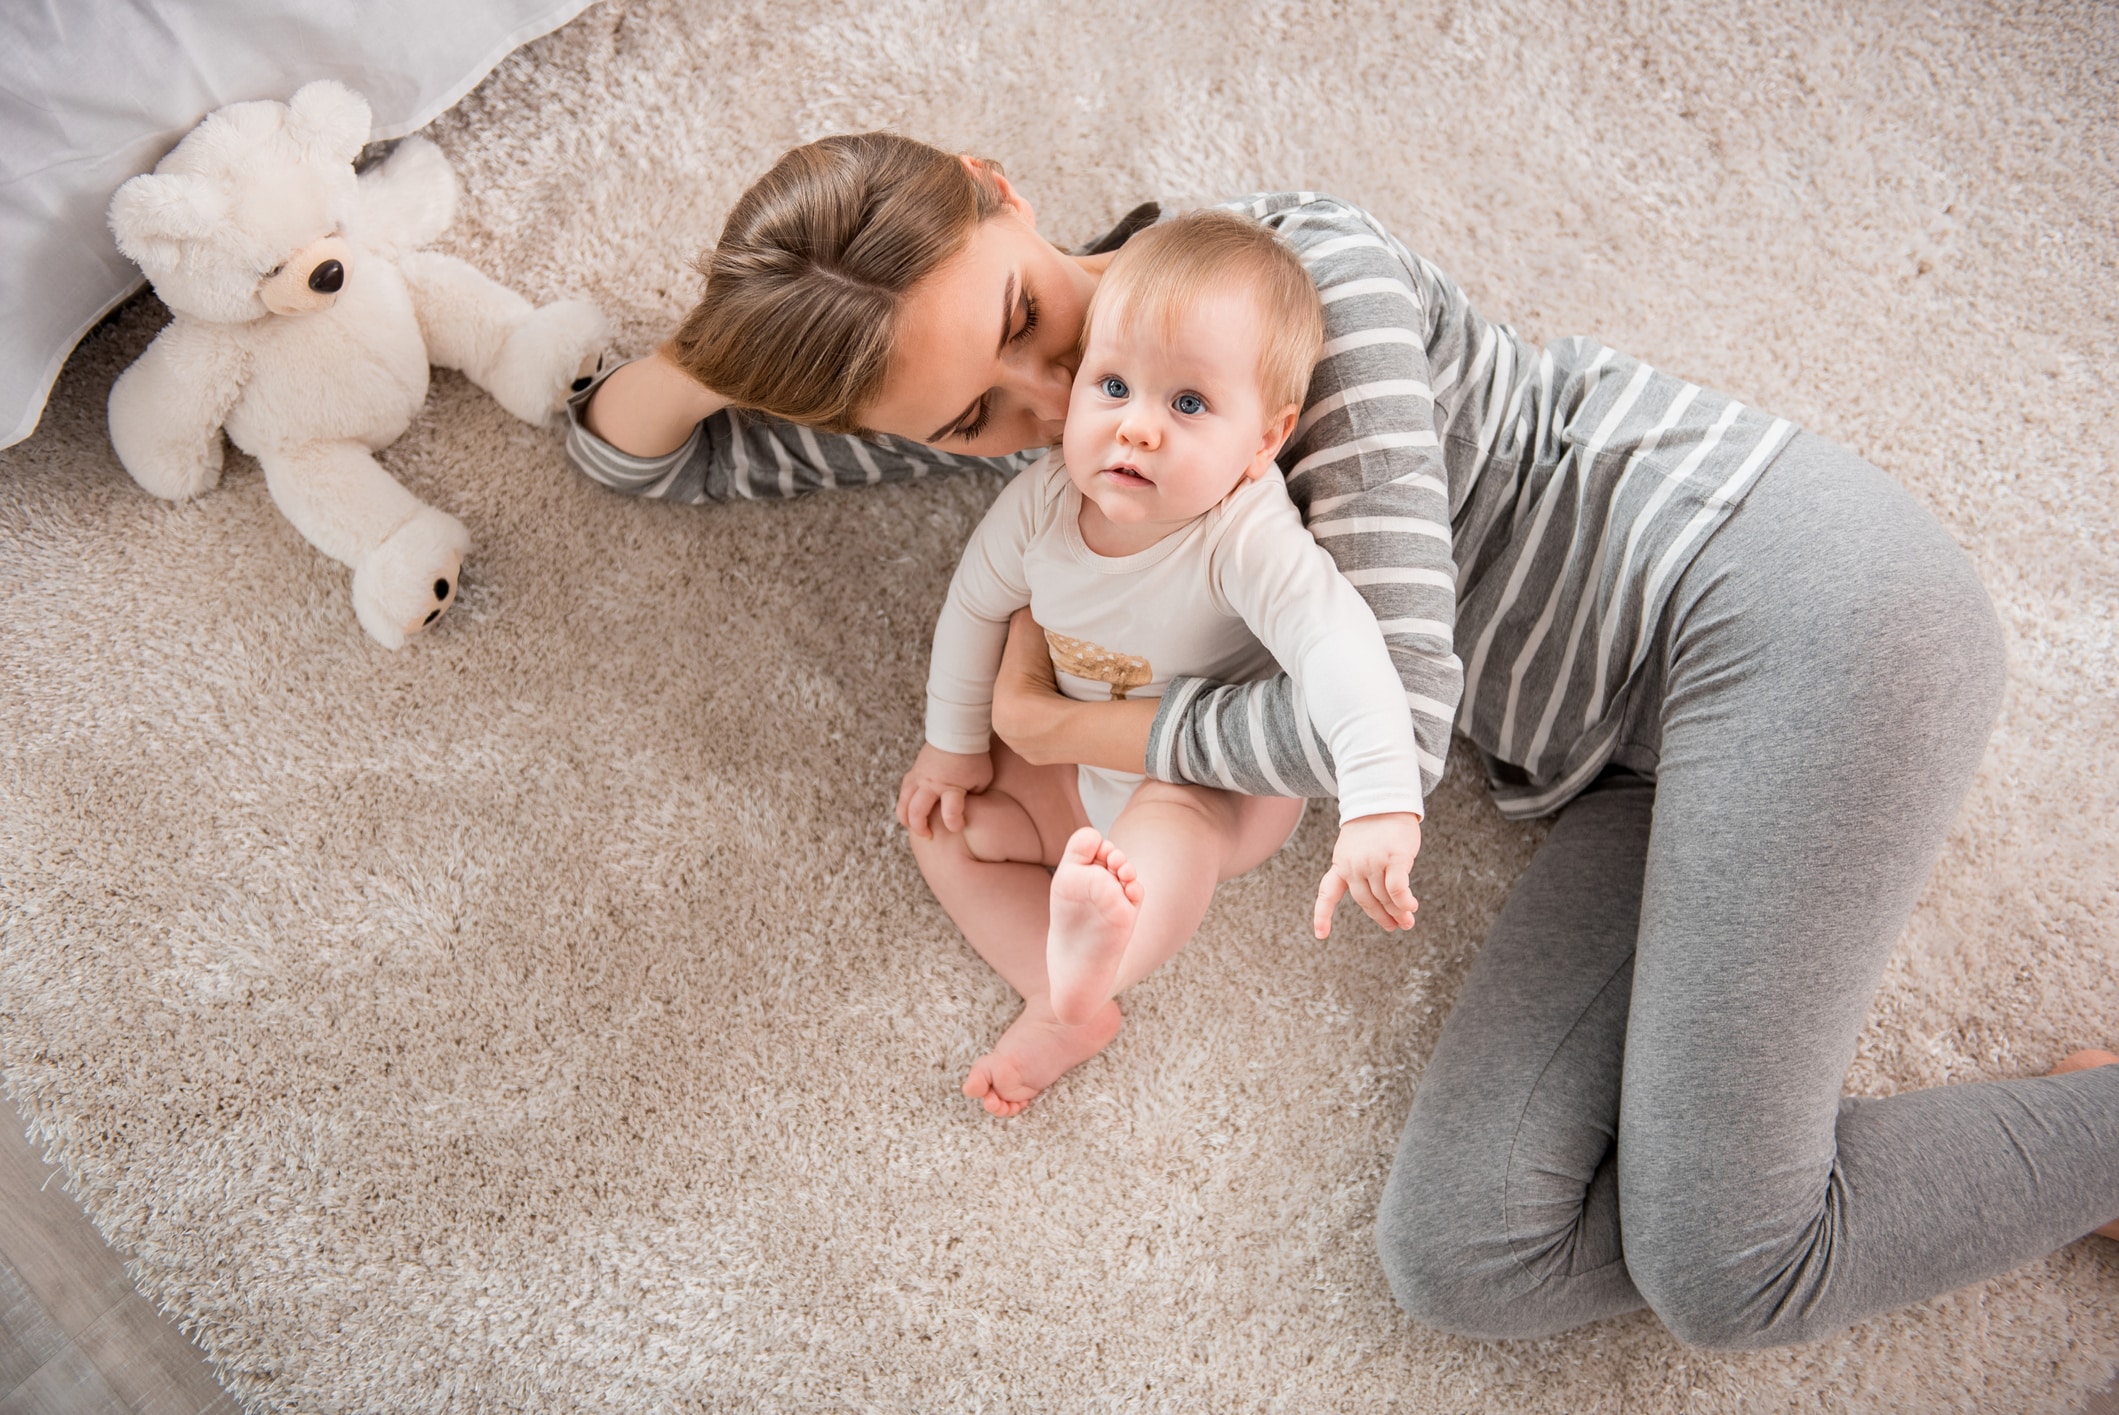 Baby Concussion Signs And What To Do, Baby Hit Head On Hardwood Floor